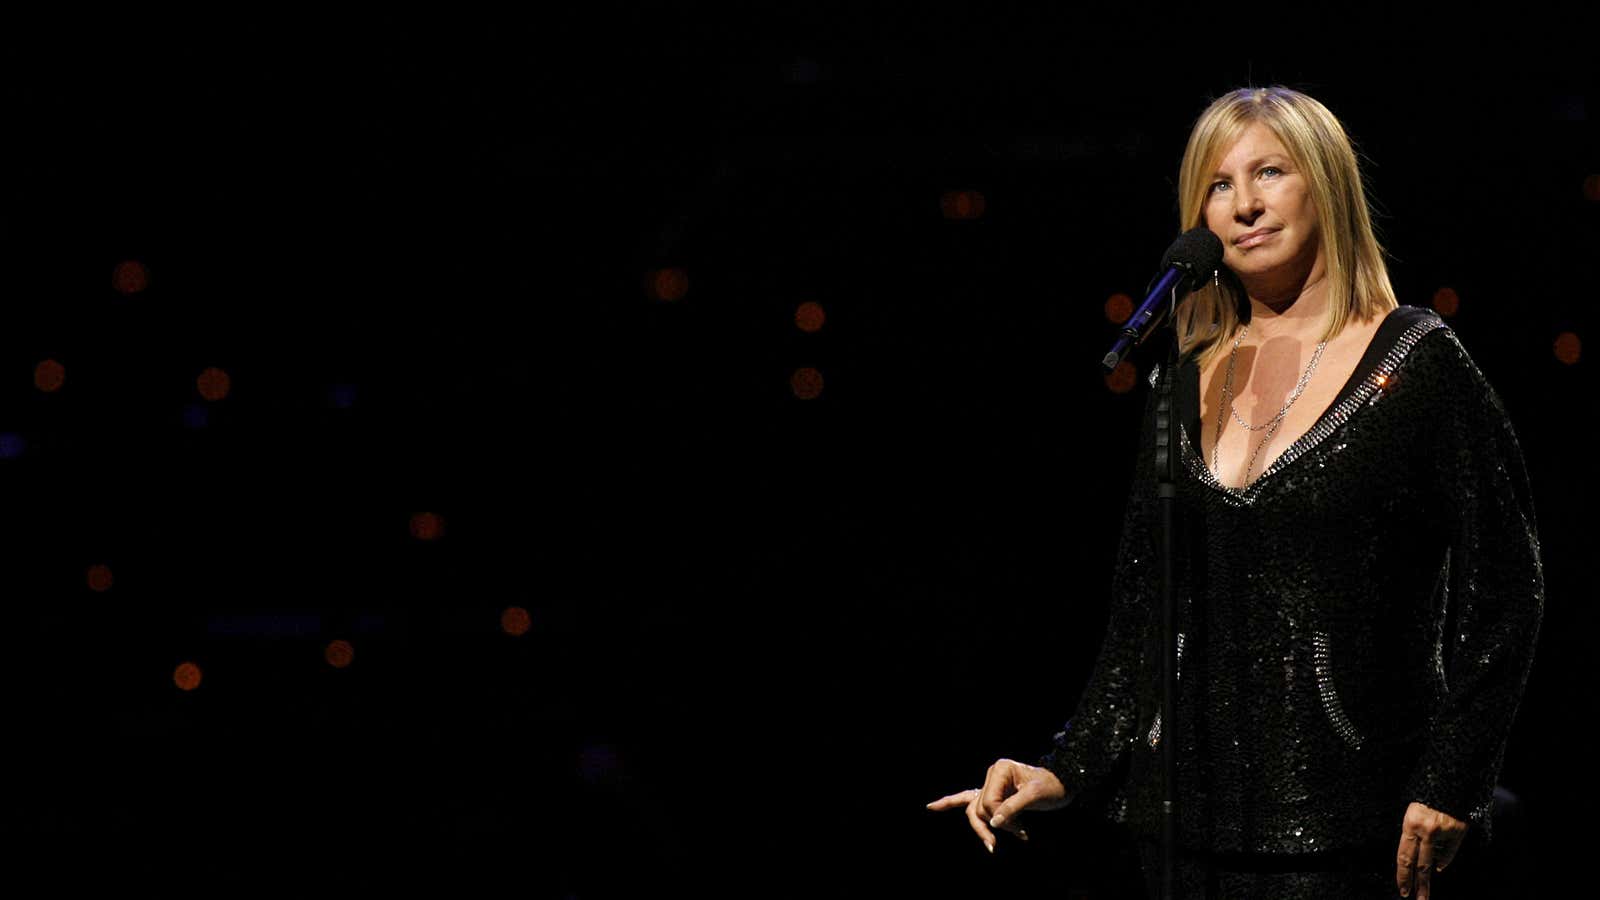 The Streisand Effect: When hiding becomes plain sight